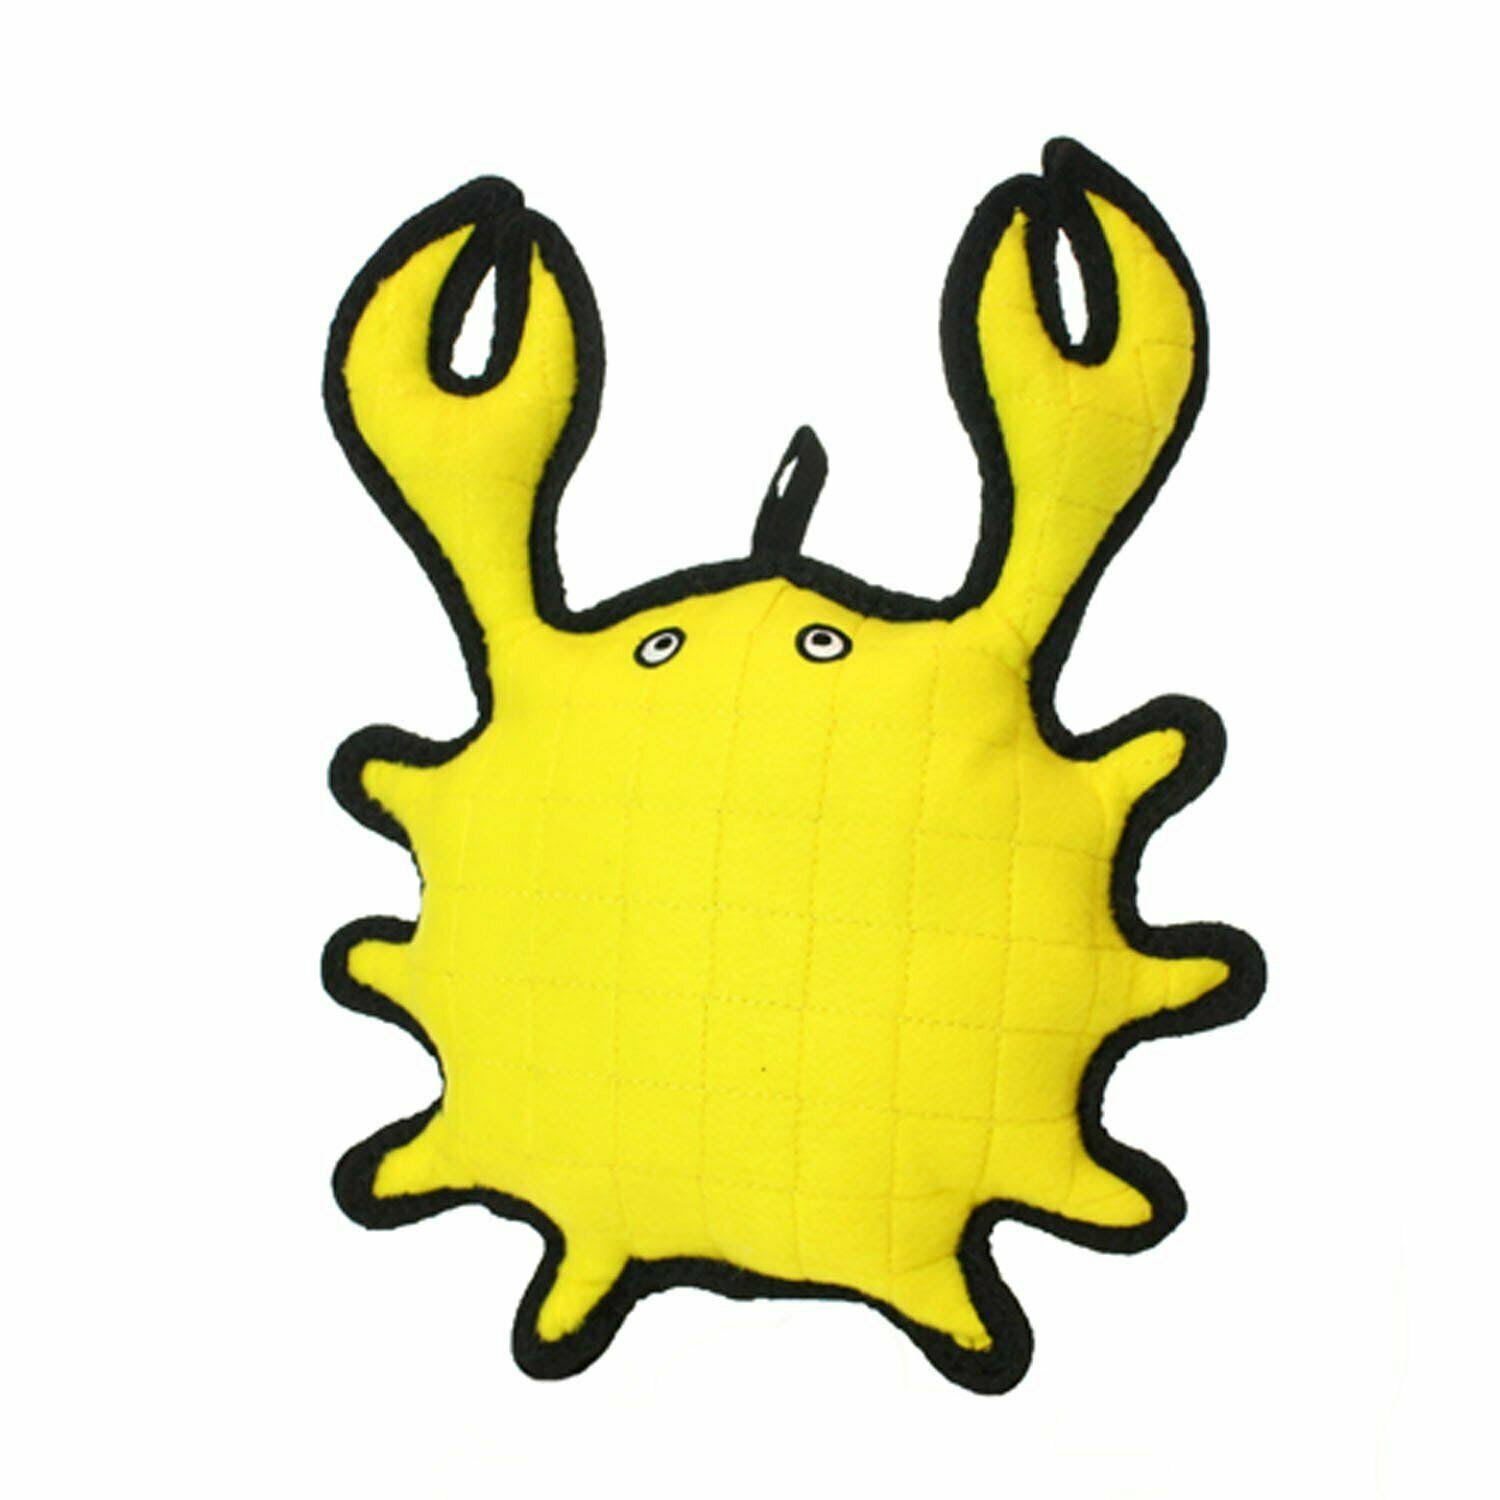 Tuffy's Sea Creature's Dog Toy - King Crab